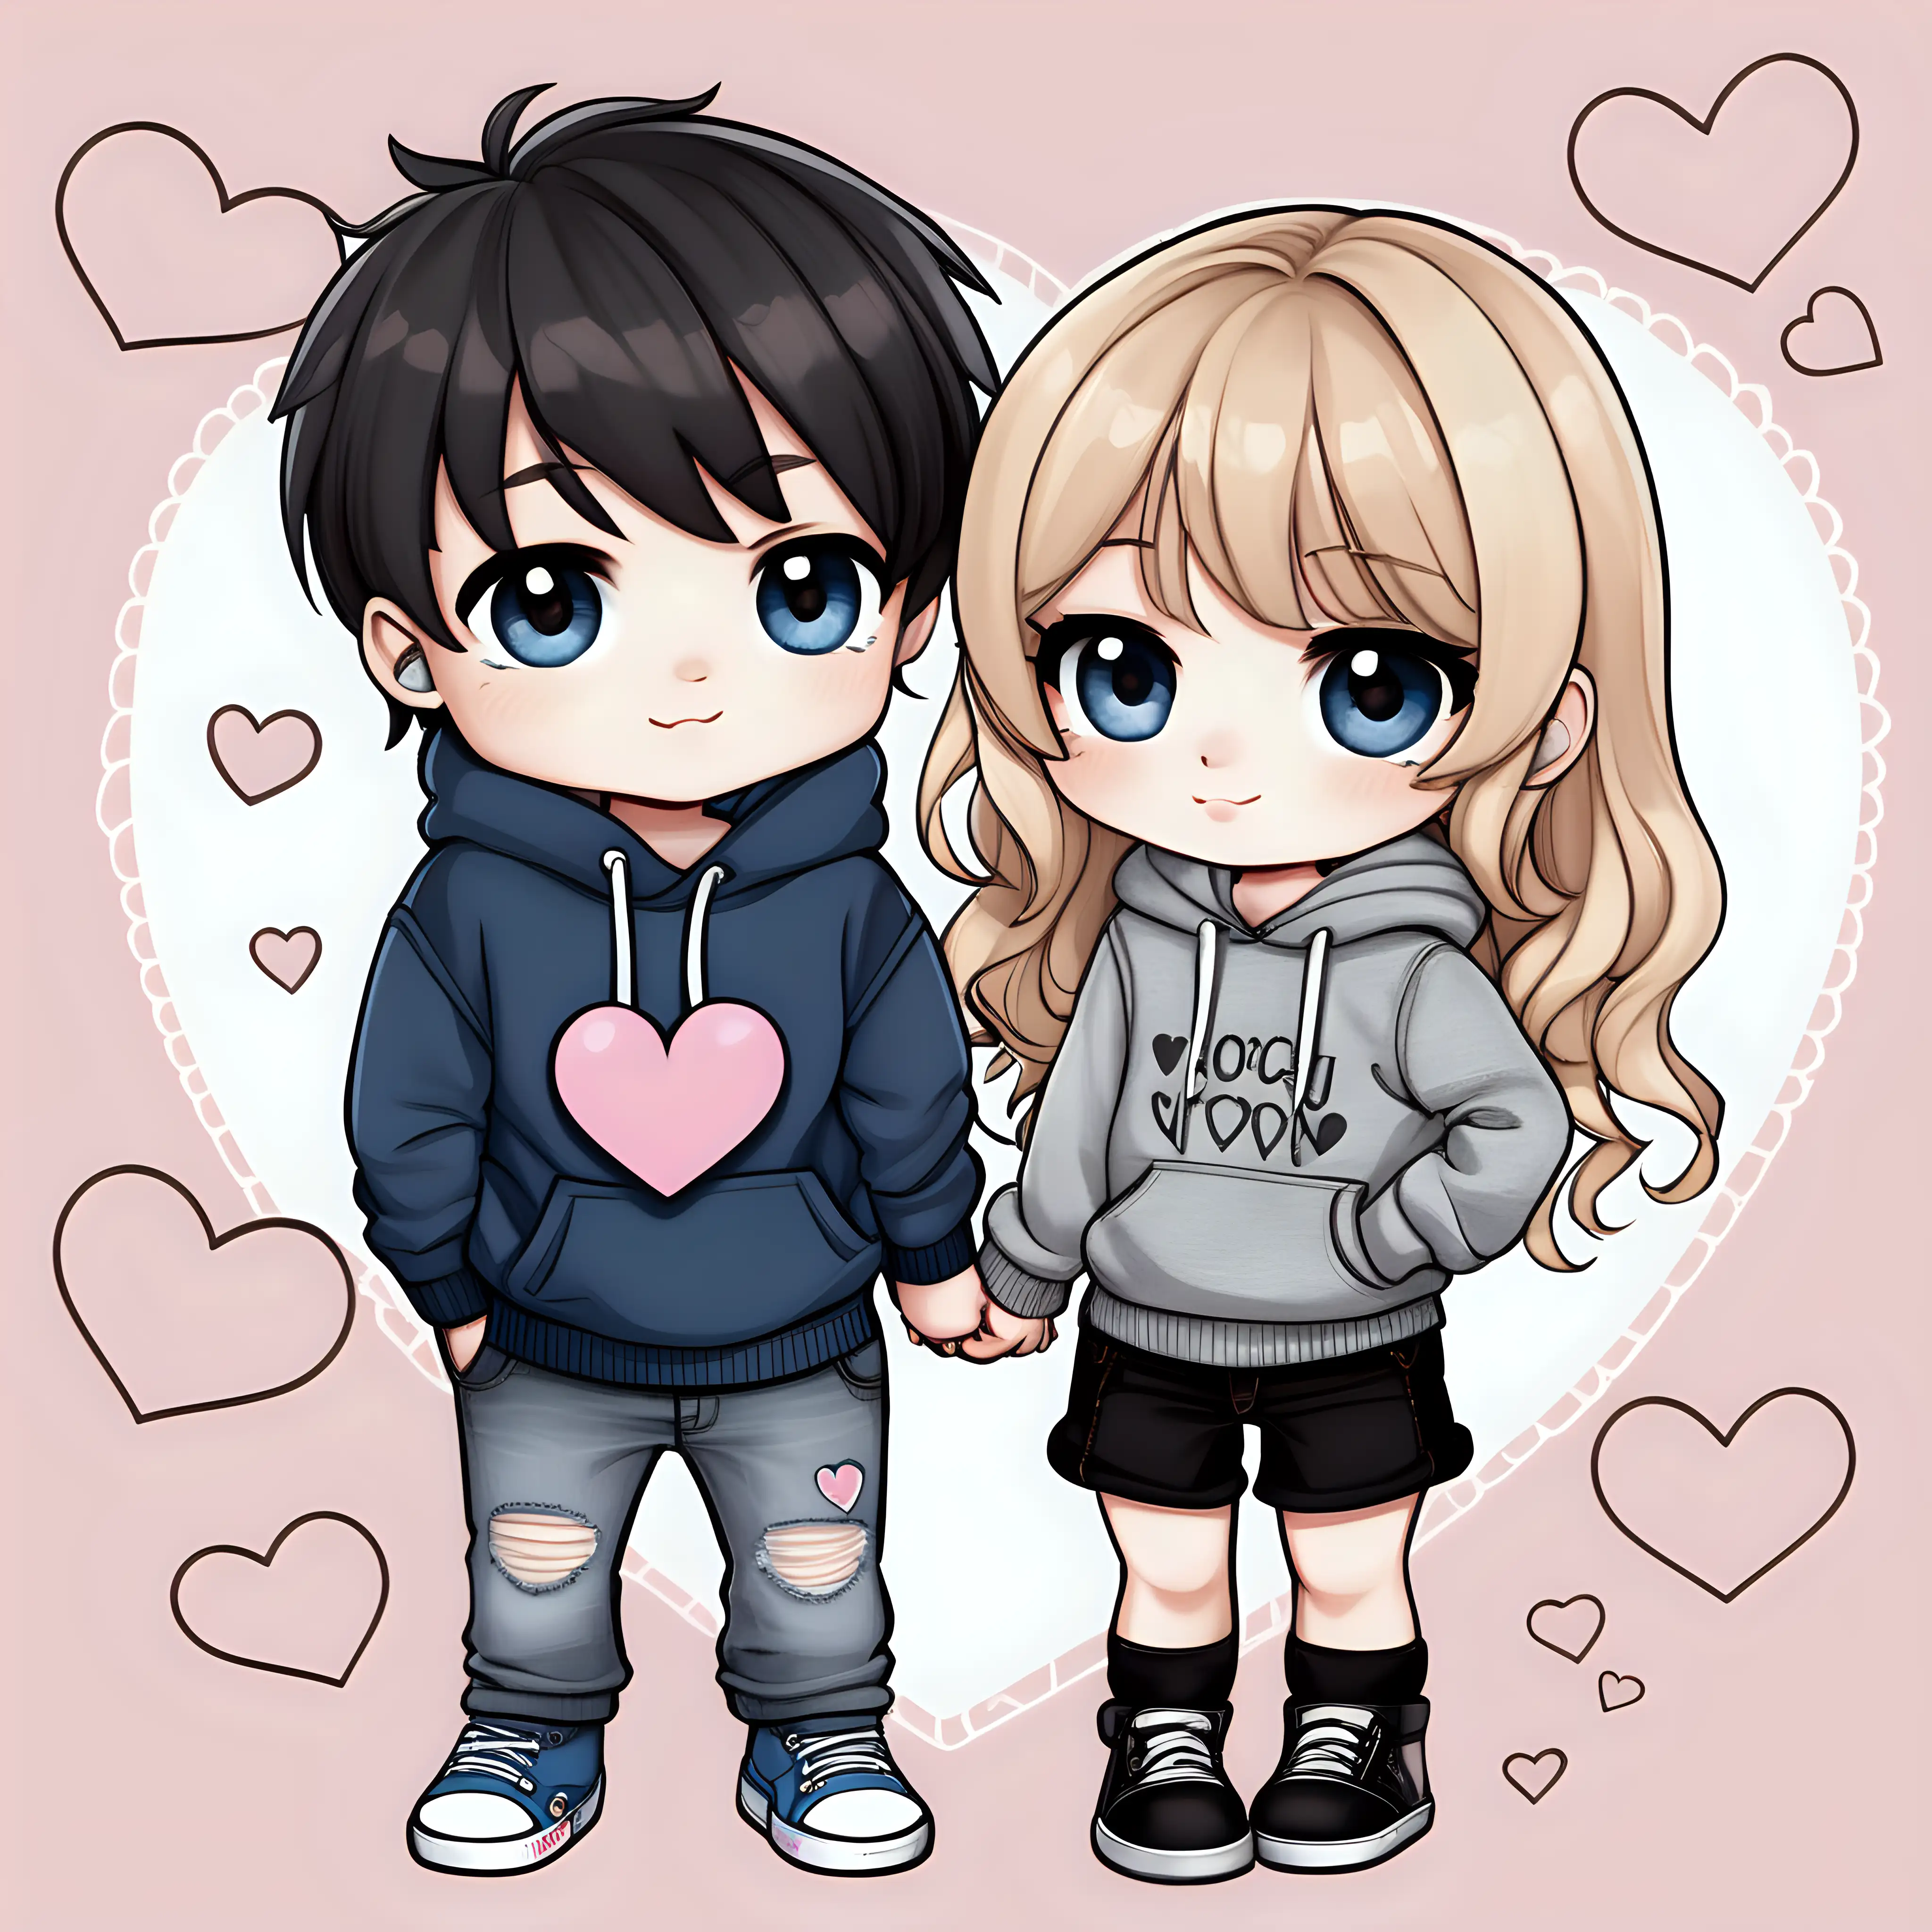 Adorable Chibi Couple Celebrating Valentines Day in Dreamy Blue Background